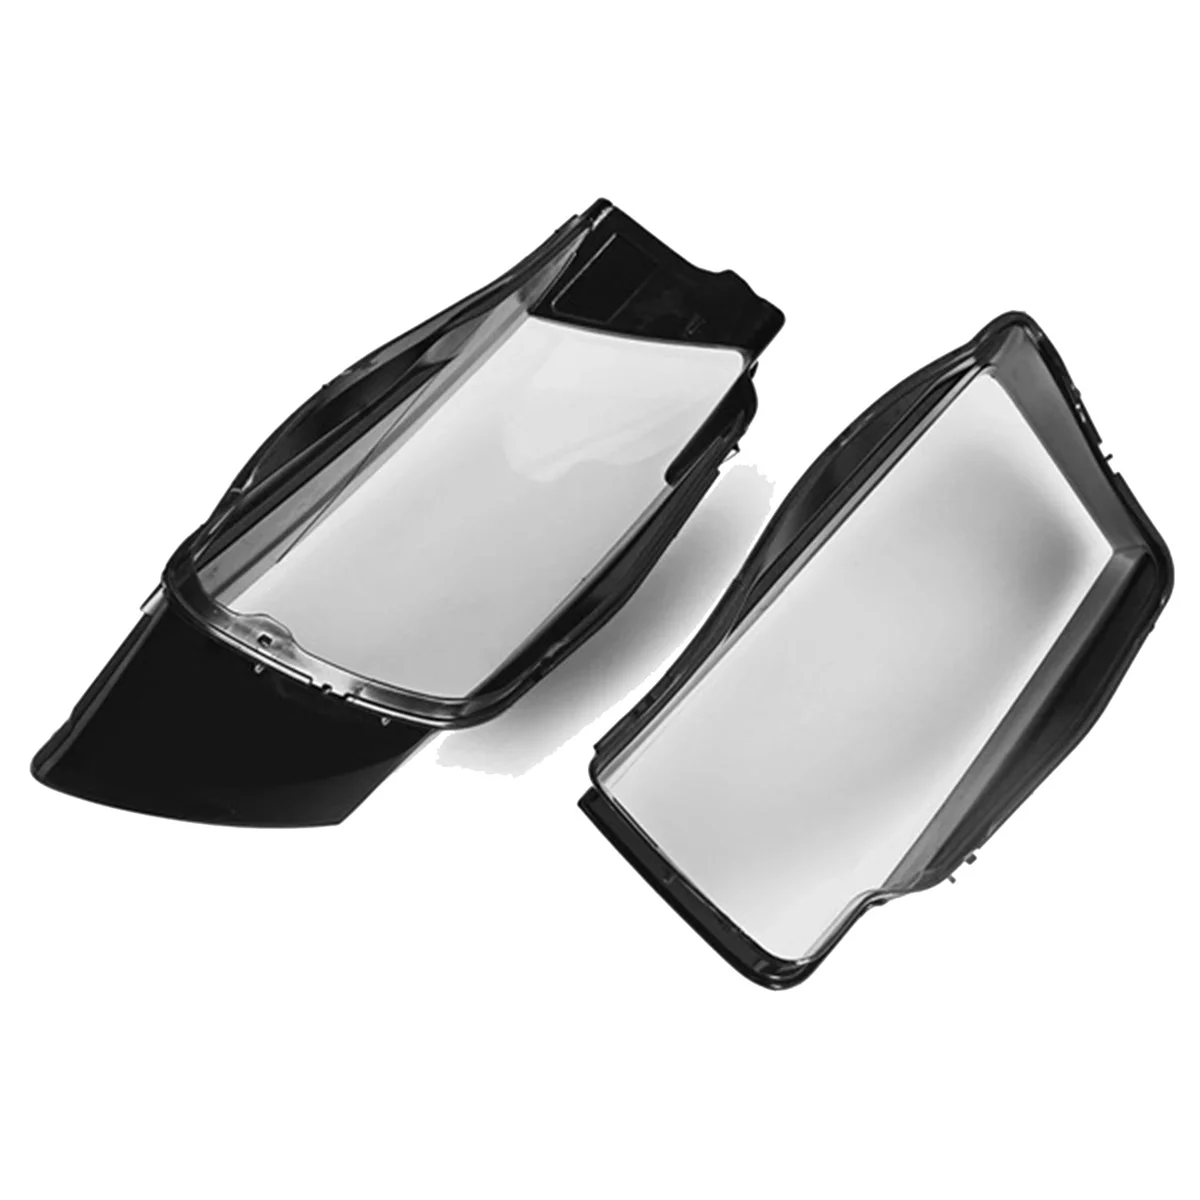 

1Pair 8T0941030 8T0941029 Front Headlight Cover Lens Shell for Audi A5 S5 RS5 2007-2012 Head Light Lampshade Housing